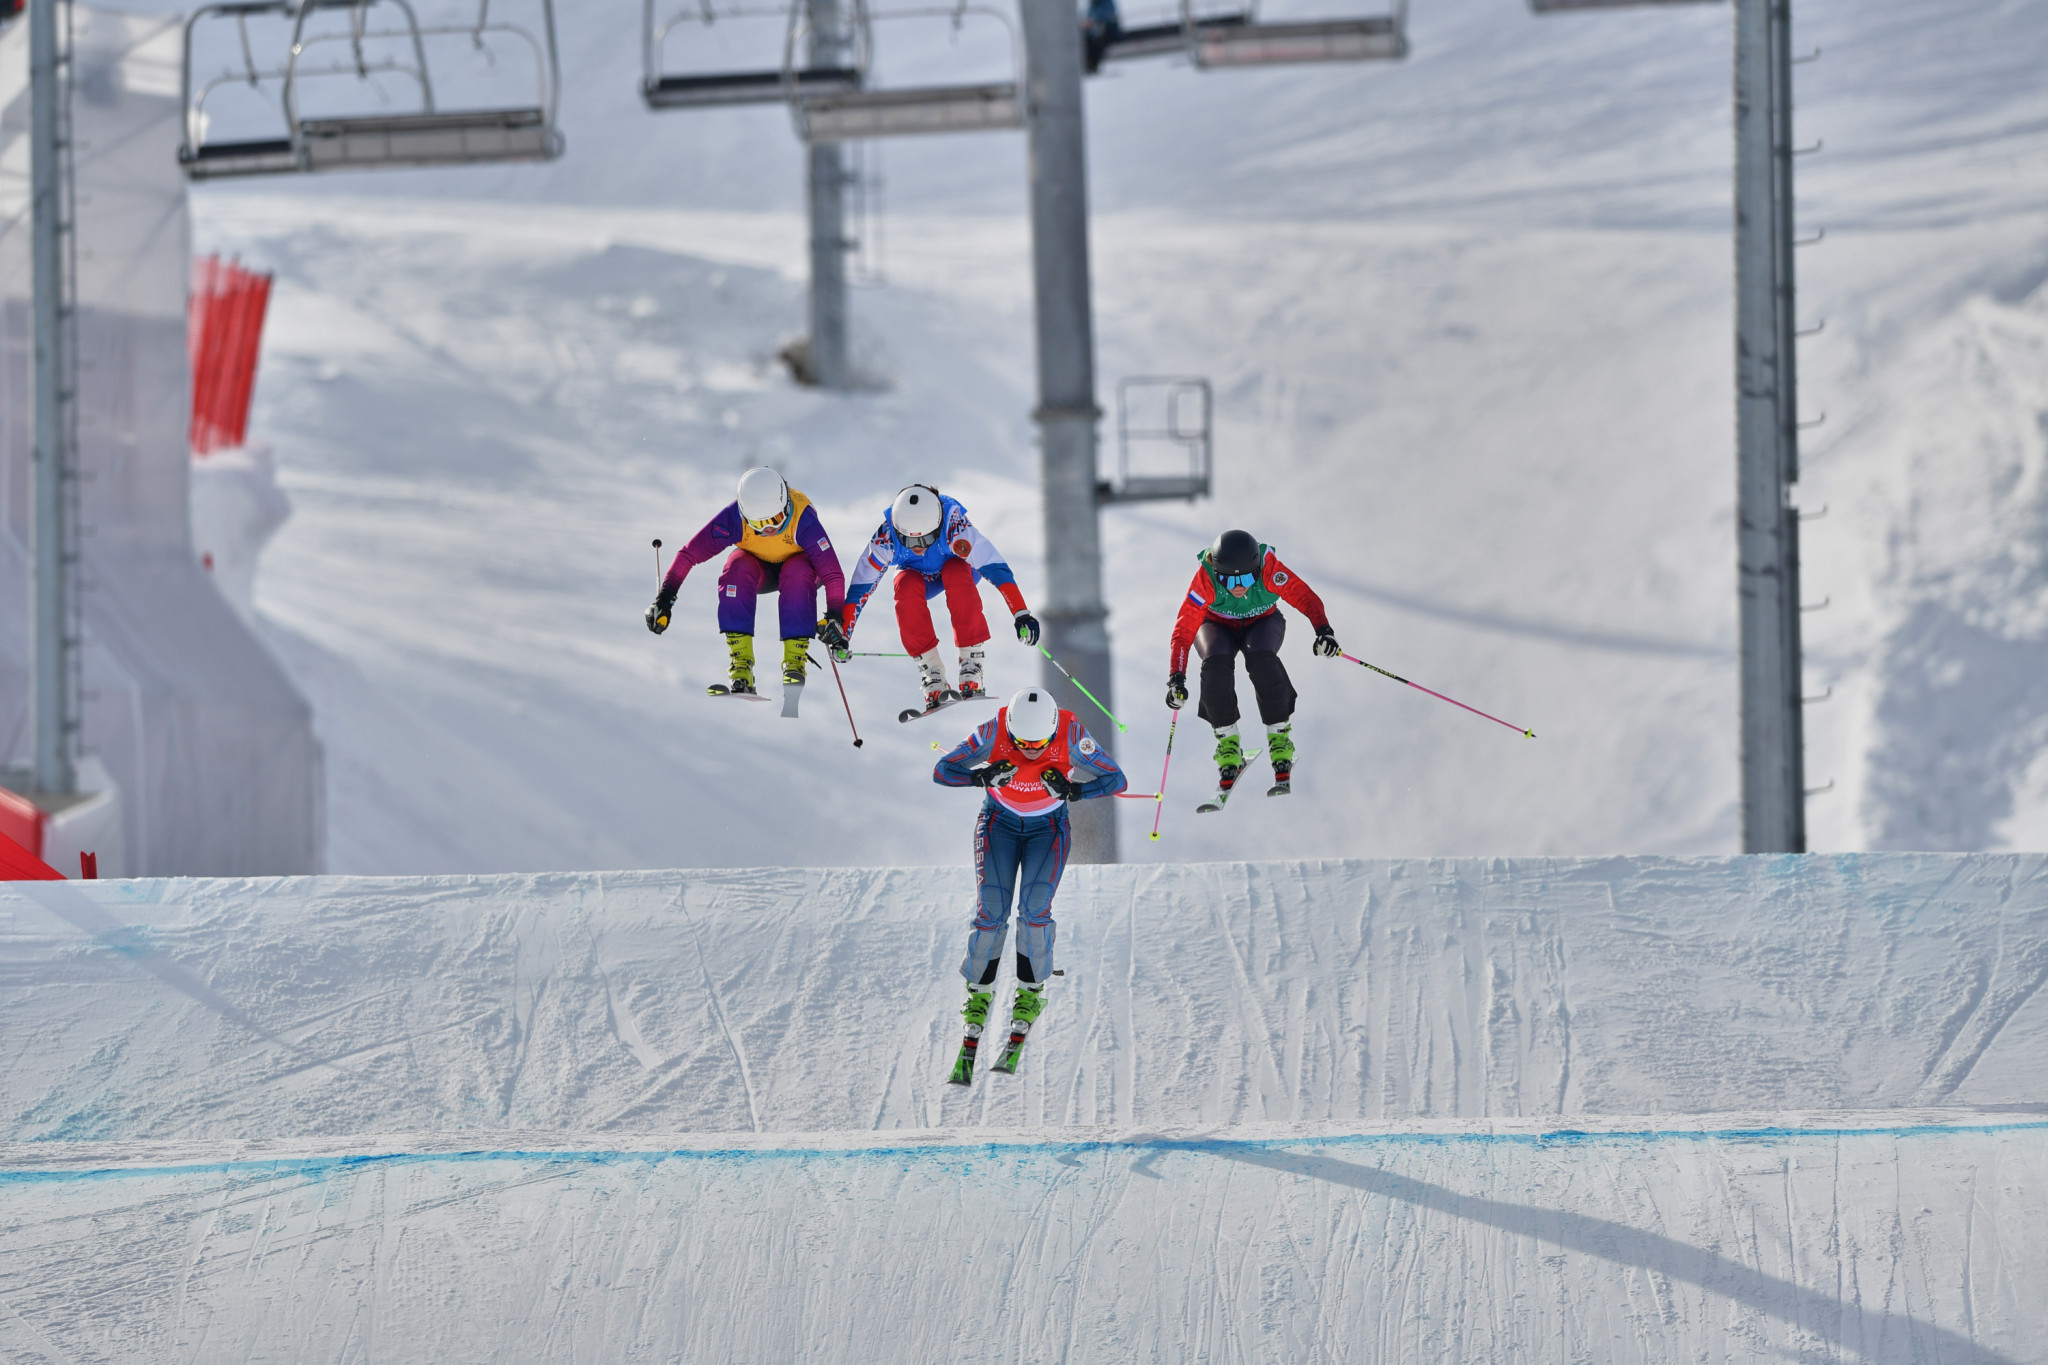 The final freestyle skiing event of the Universiade took place, with athletes competing in the ski cross at the Sopka Cluster ©Krasnoyarsk 2019